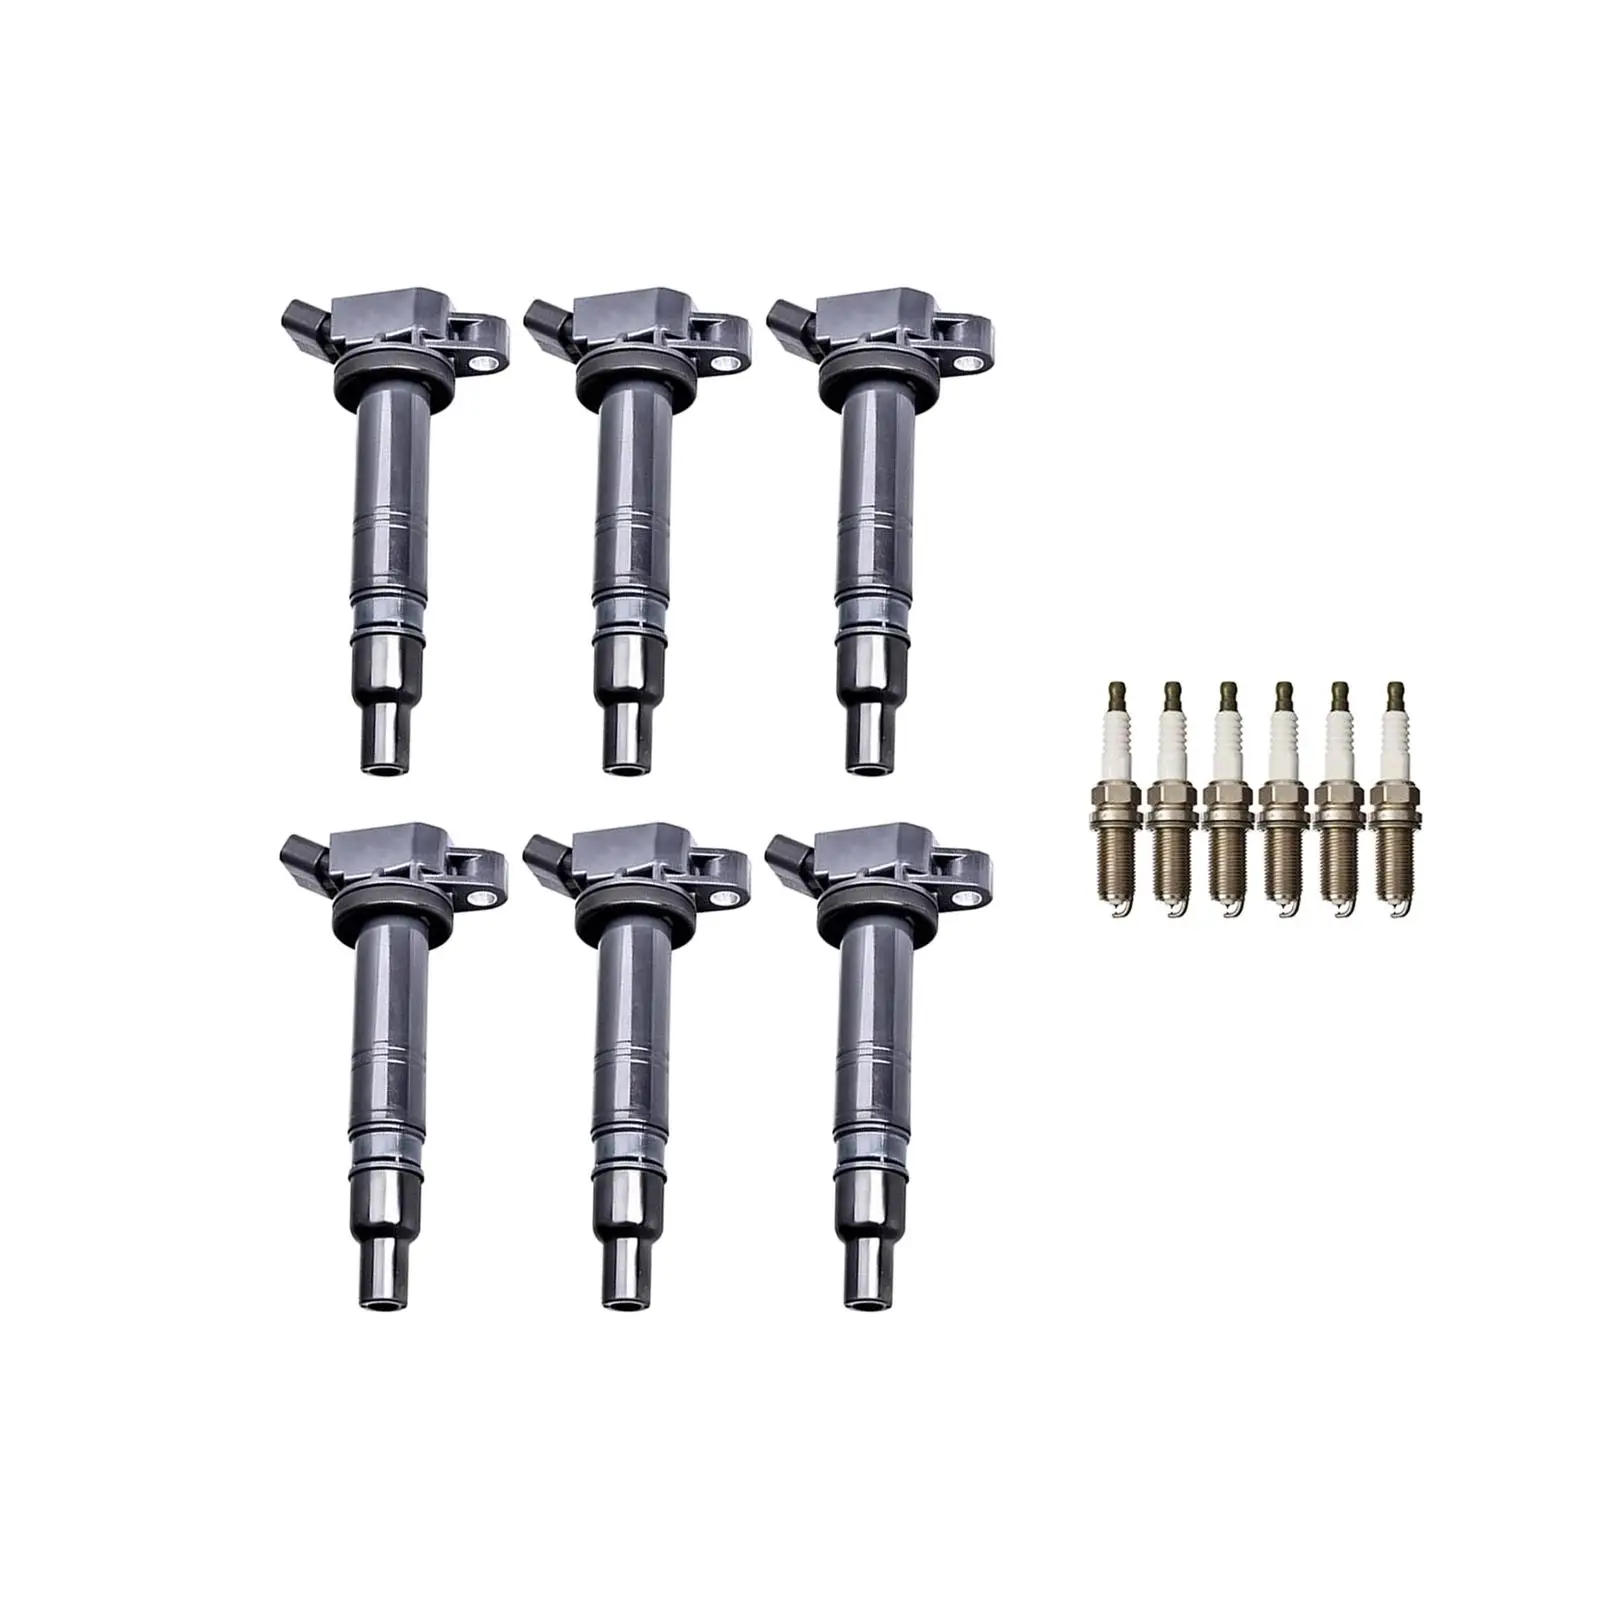 6 Ignition Coils 6 Iridium Spark Plugs IC3157AA470406 Automotive Parts Ignition Coil Set Durable for Toyota for tacoma 4 Runner